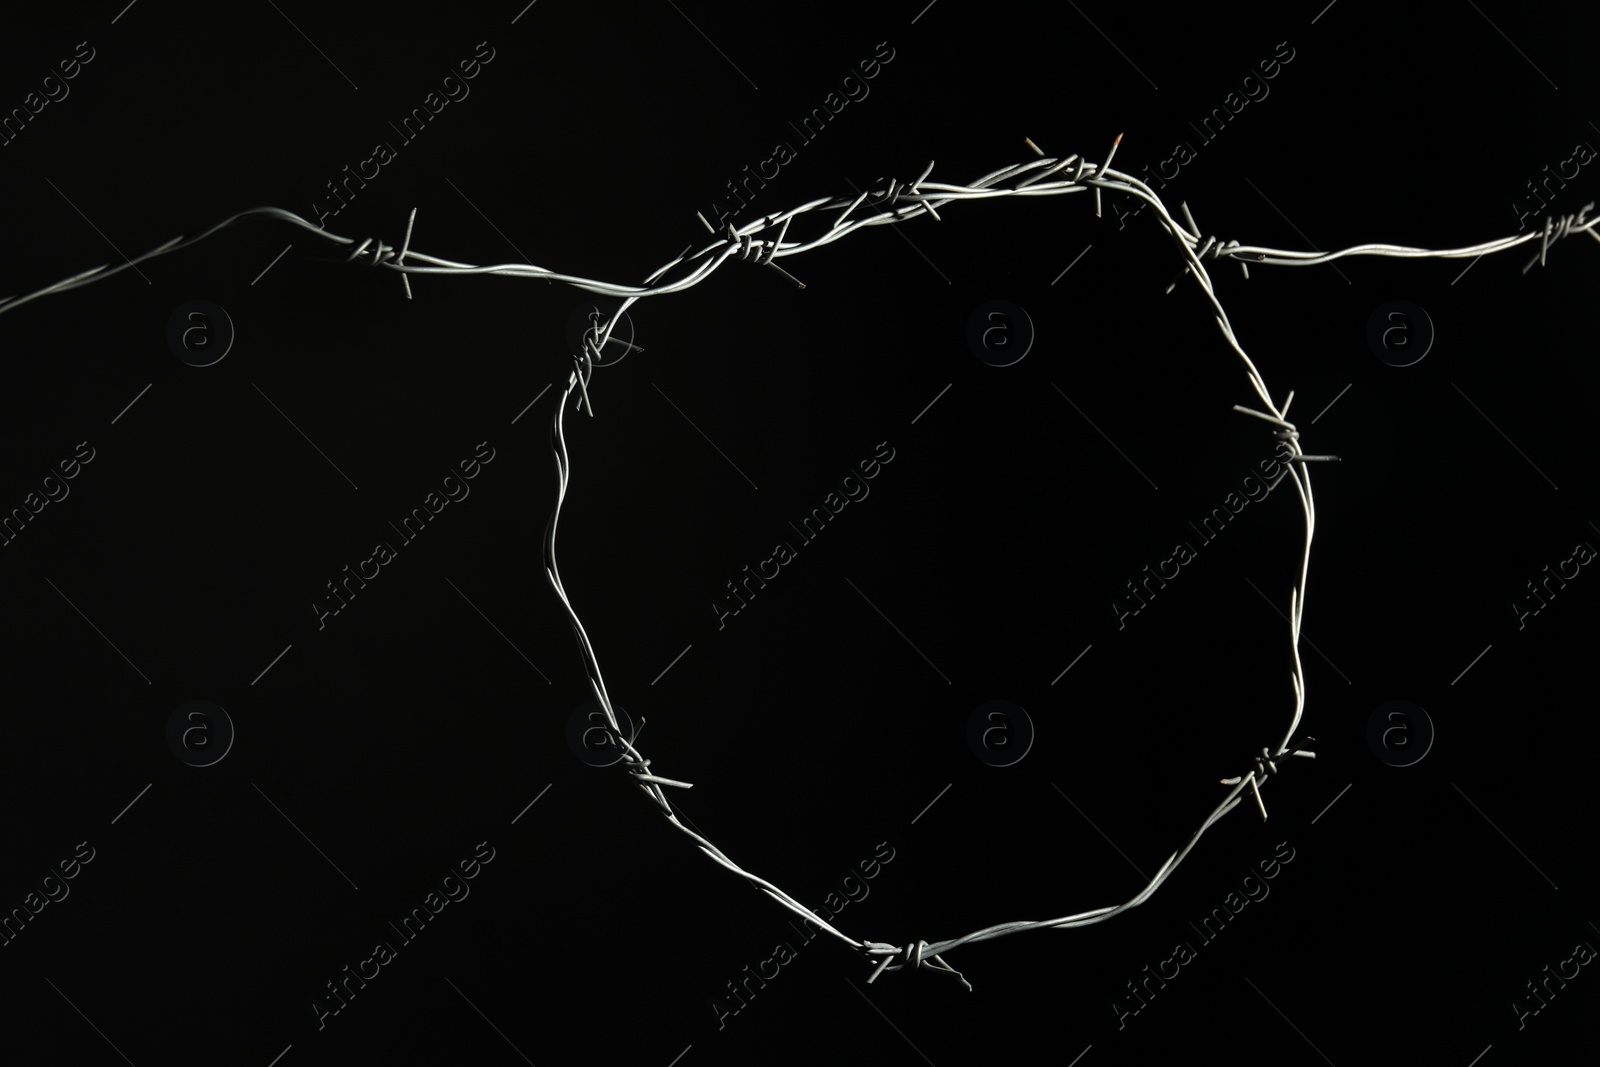 Photo of Shiny metal barbed wire on black background